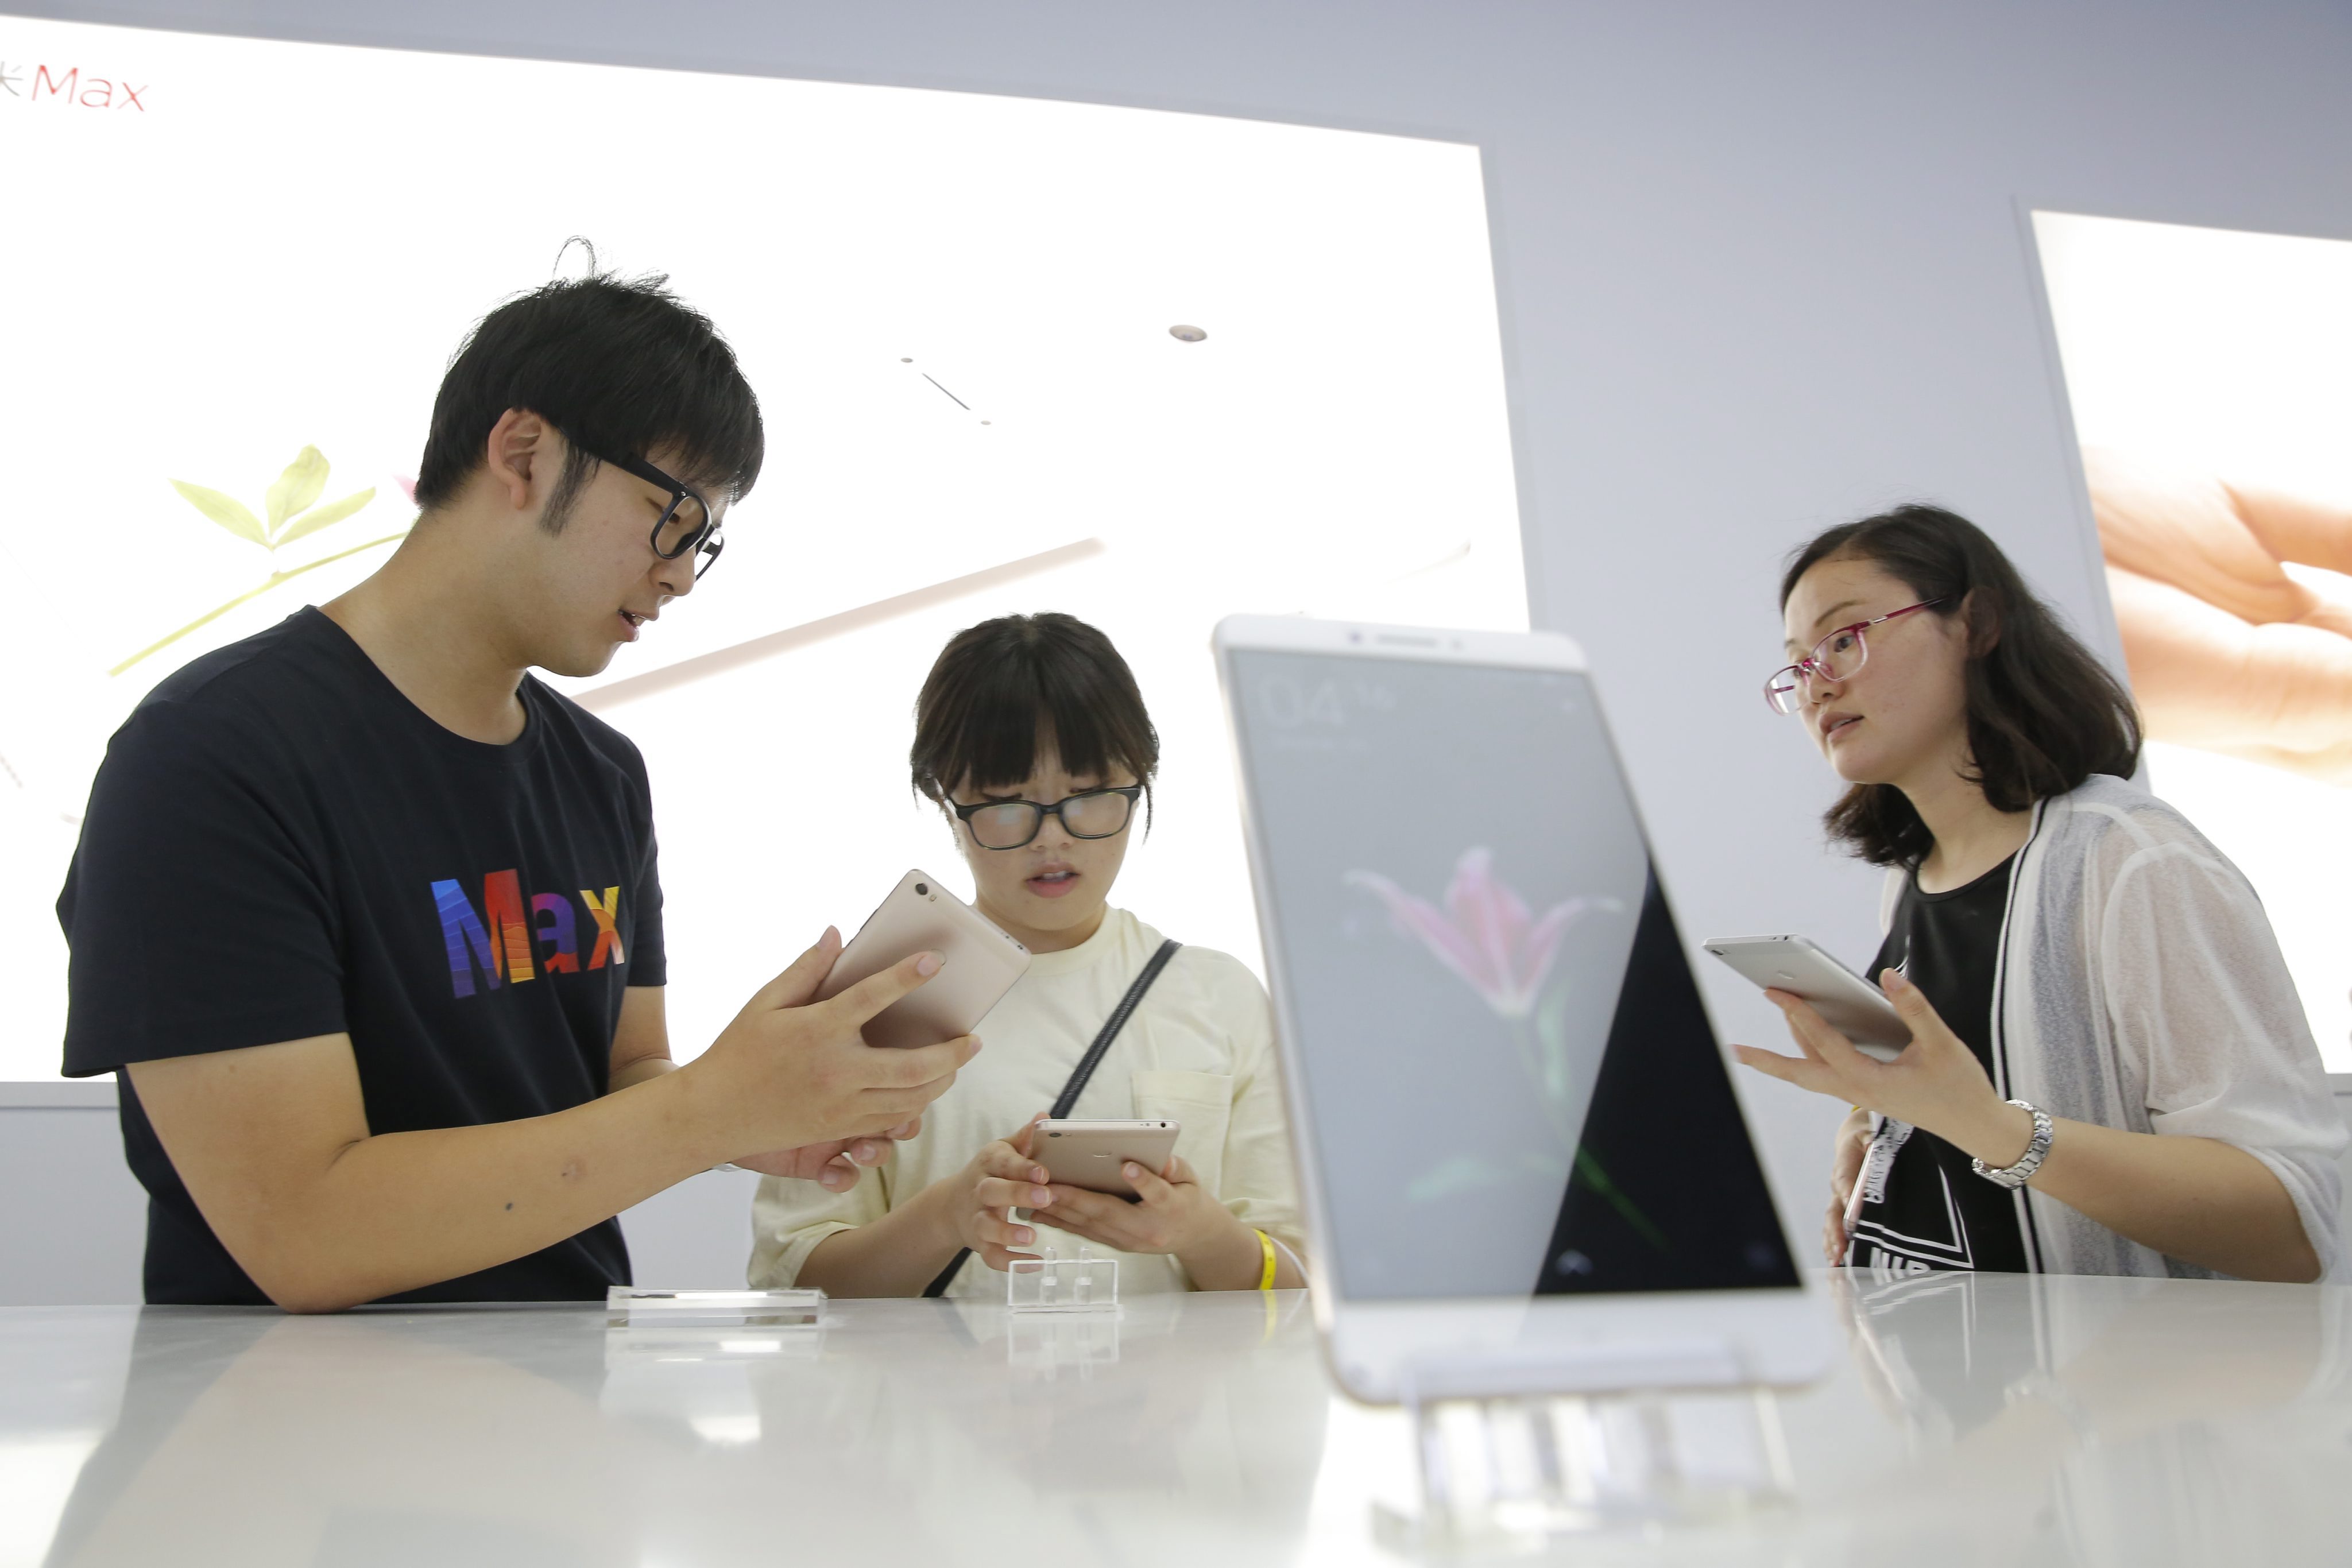 2016-05-10 14:49:13 epa05297510 Visitors experience the new smartphone 'Xiaomi Max' on show after the Xiaomi product launch ceremony in Beijing, China, 10 May 2016. Xiaomi released a new mobile phone 'Xiaomi Max' and operating system MIUI 8 on 10 May 2016. EPA/WU HONG